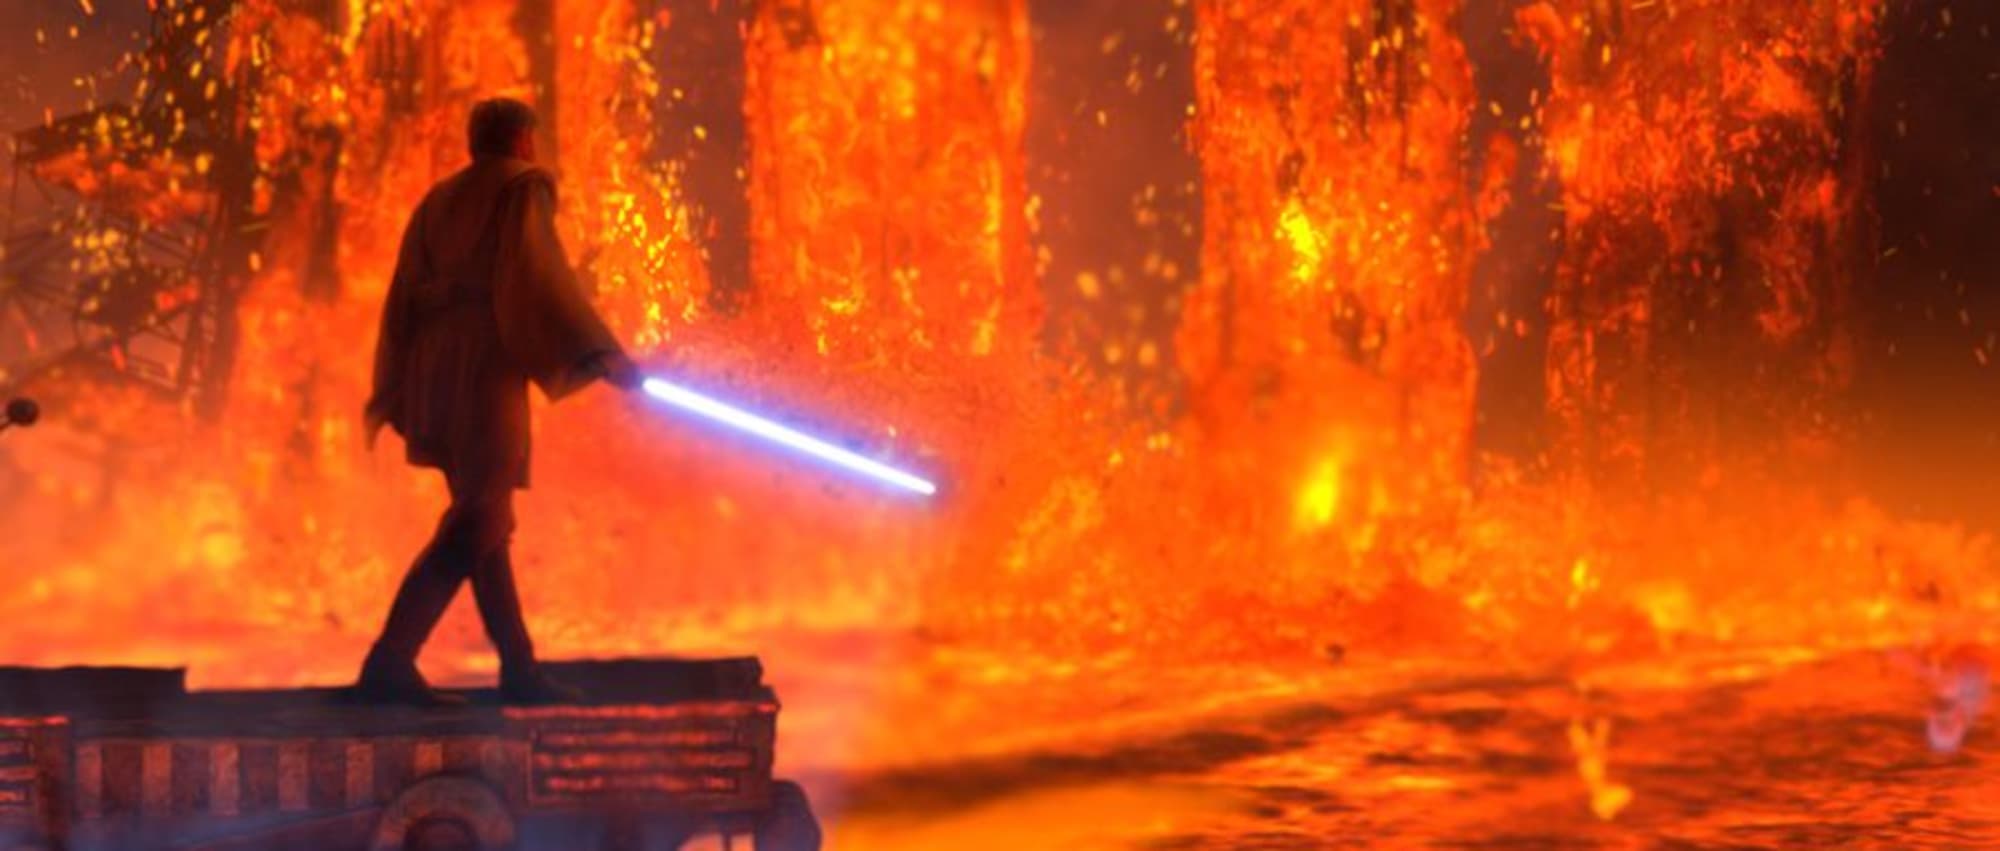 Star Wars Ep. III: Revenge of the Sith download the new version